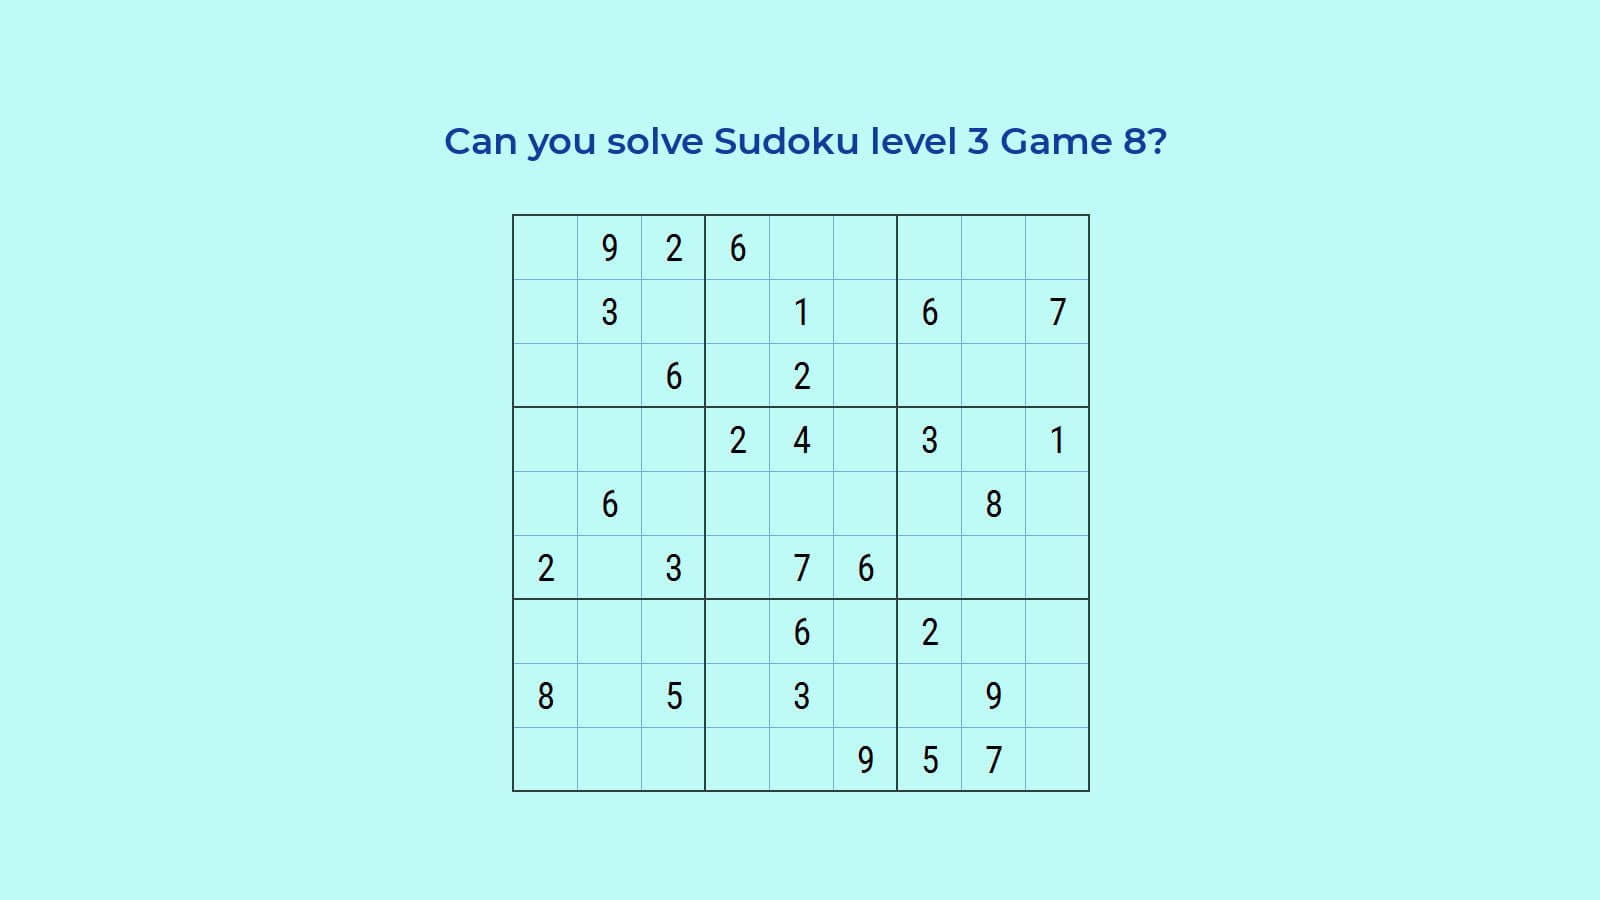 Sudoku level 3 Game 8: Step by Step Easy to Understand Solution